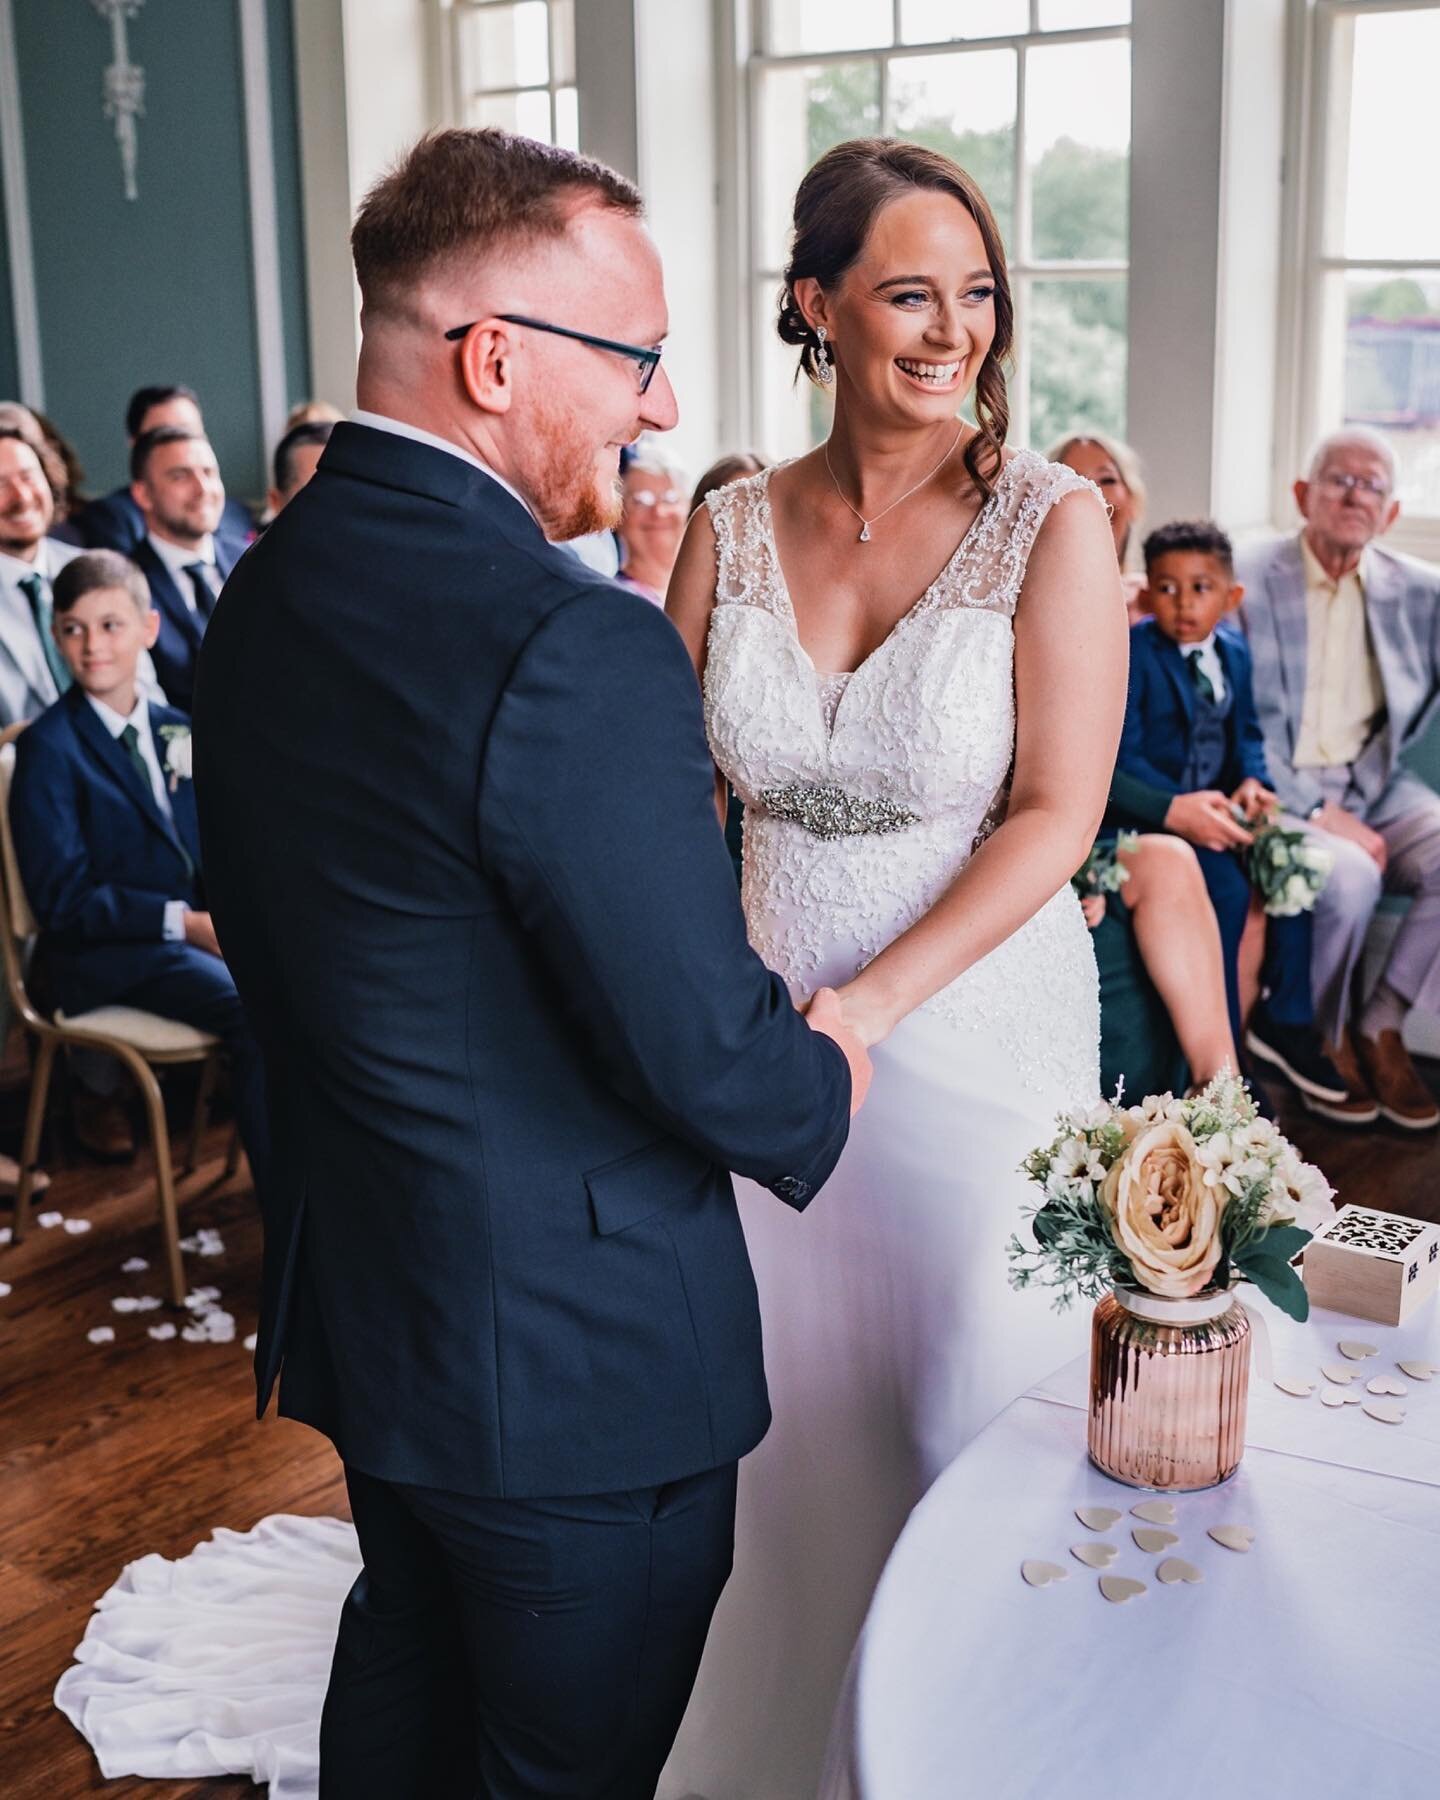 ~AMY + JOSH~

The most perfect wedding day for the most perfect couple. It was such a lovely day filled with lots of love and celebrations. Everywhere I looked was full of smiles. Have the best life together as Mr + Mrs Walton &hearts;️

Venue: #moli